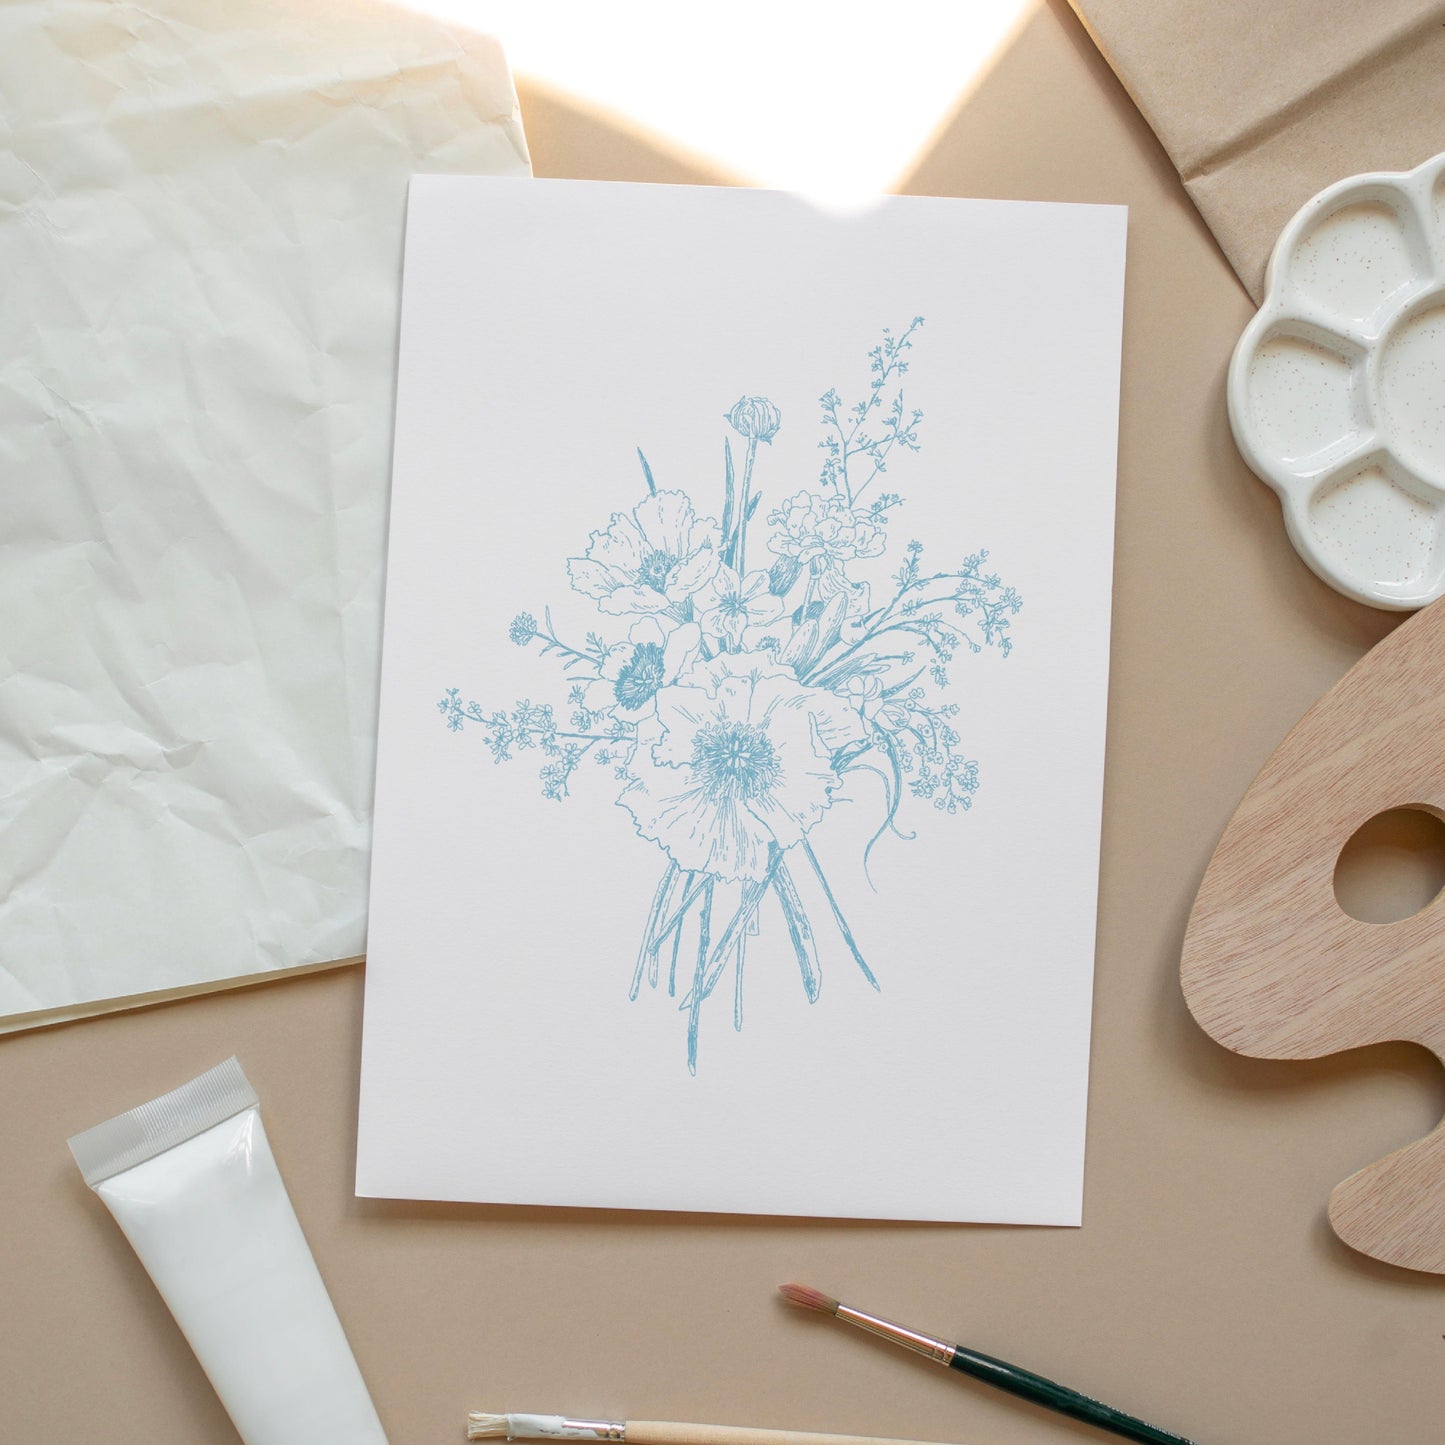 Floral Study I in Blue Art Print